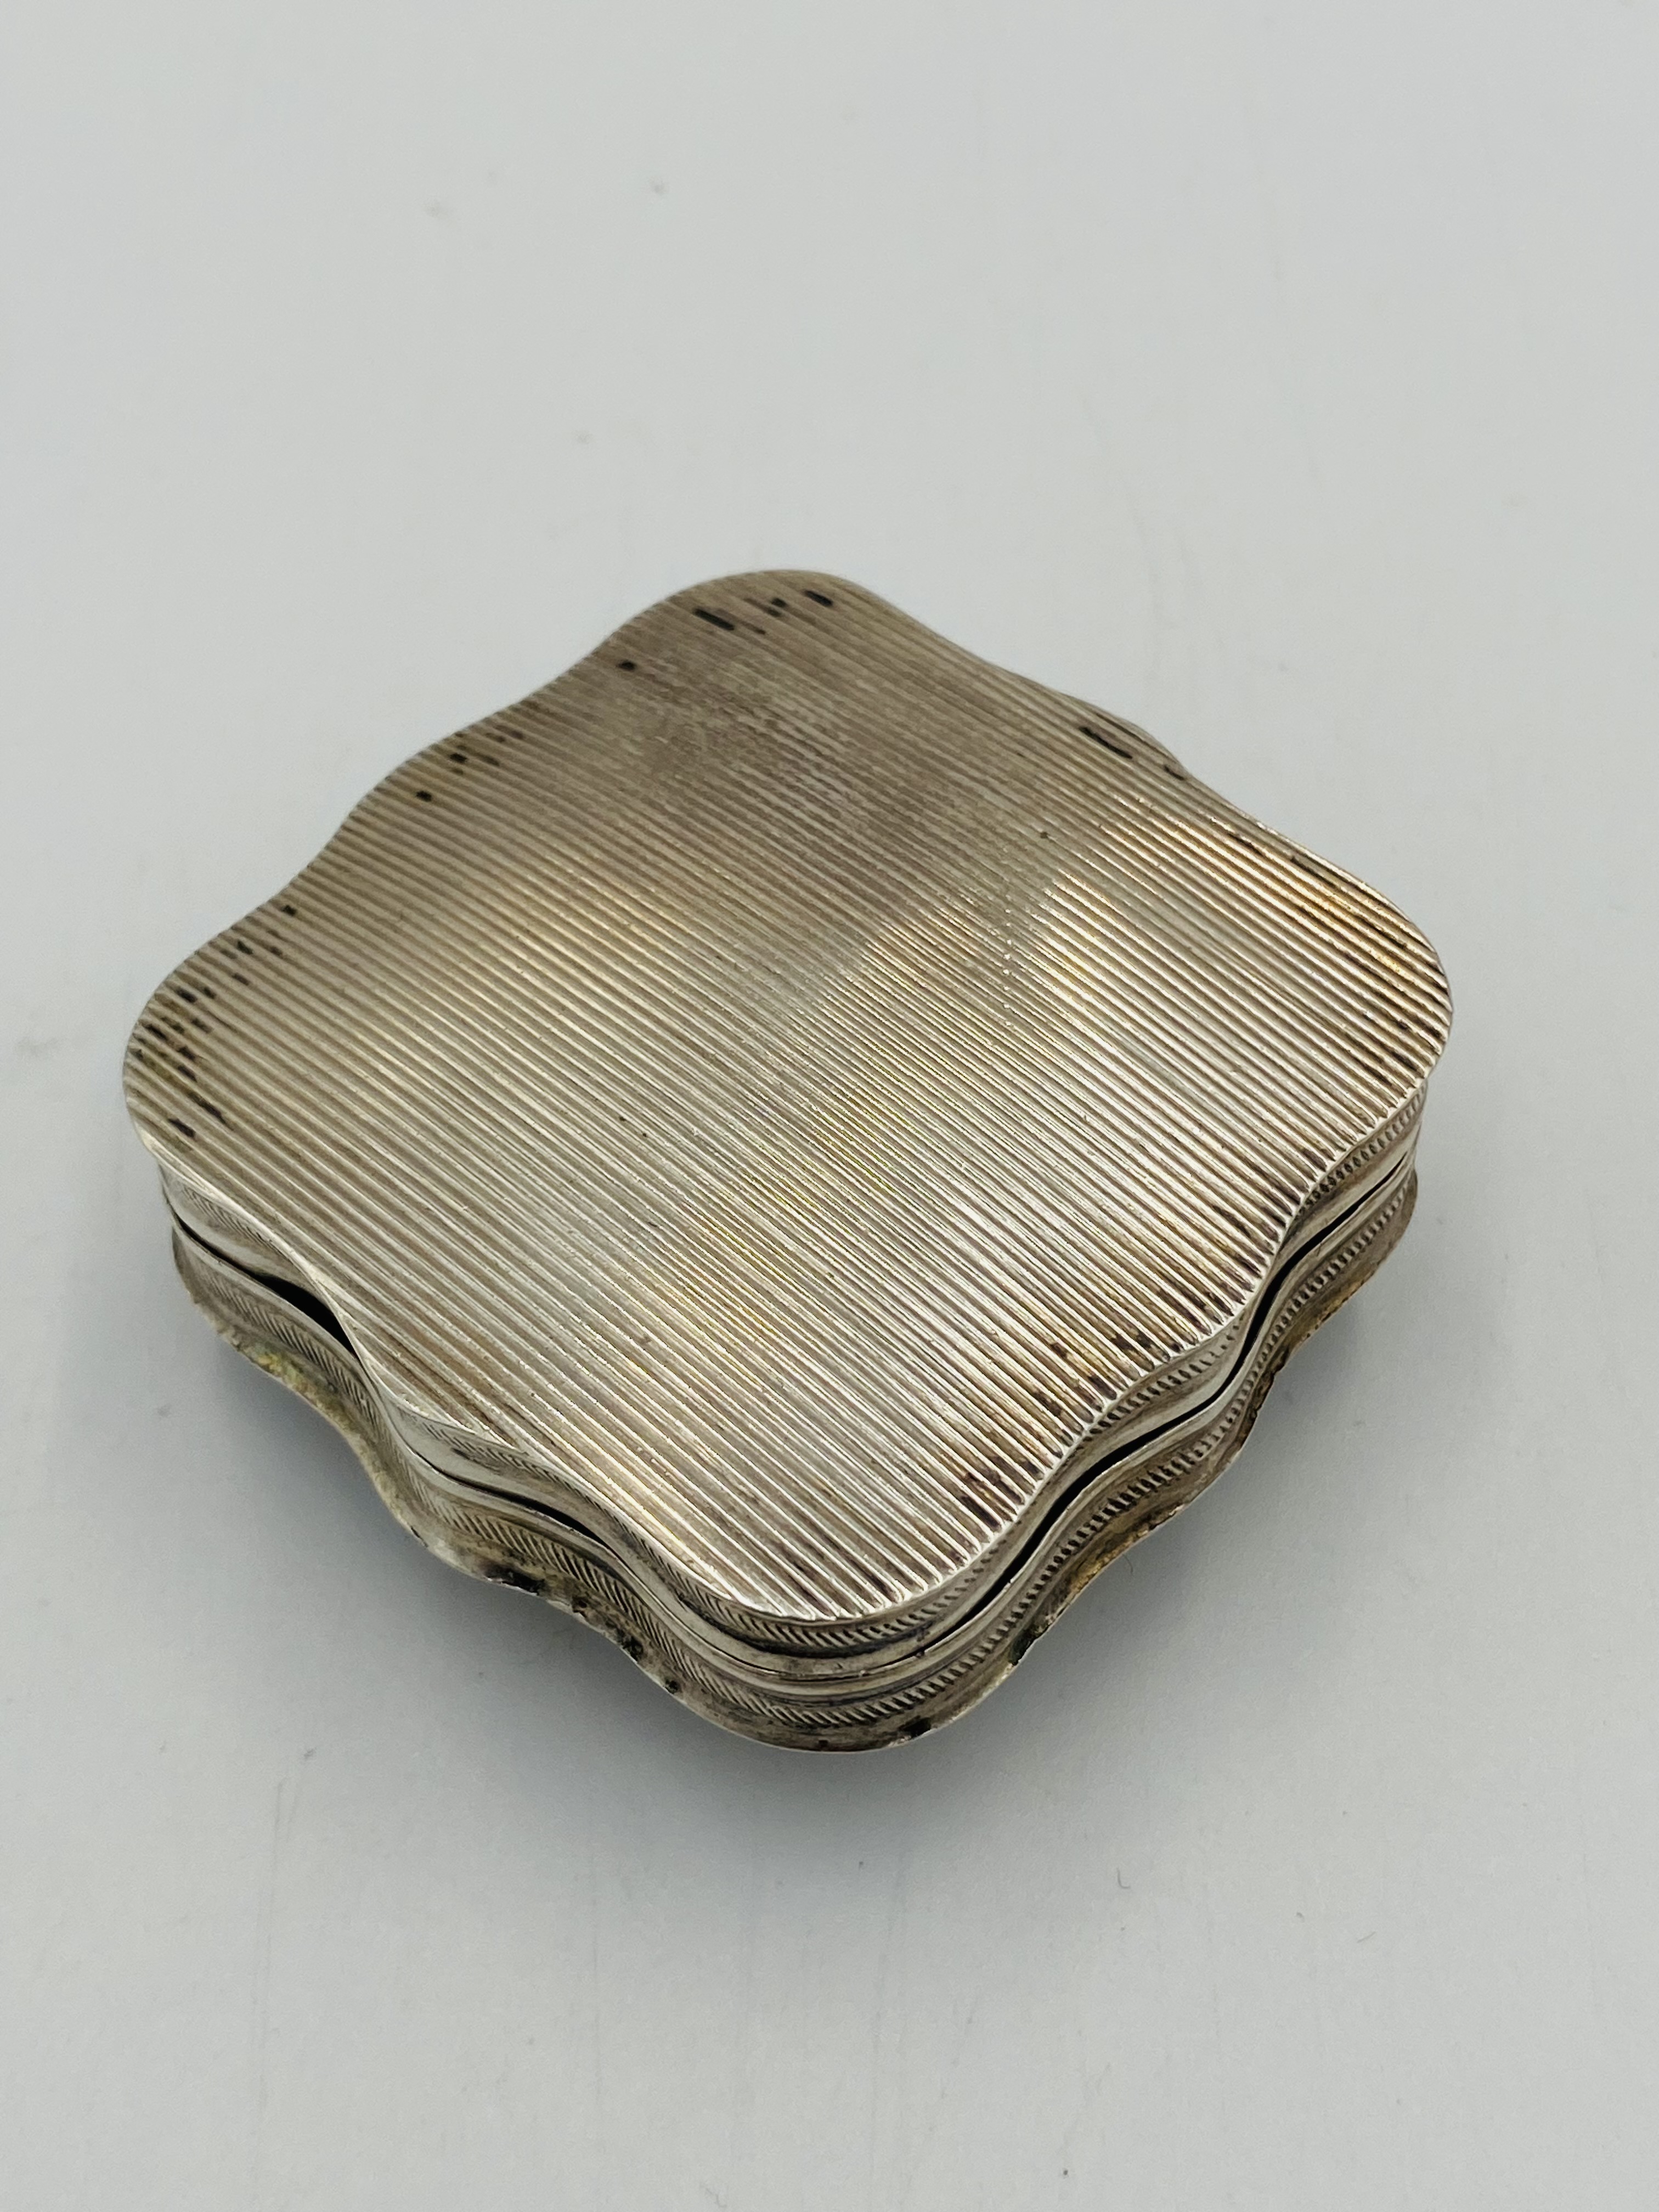 19th century Dutch silver peppermint box - Image 4 of 4